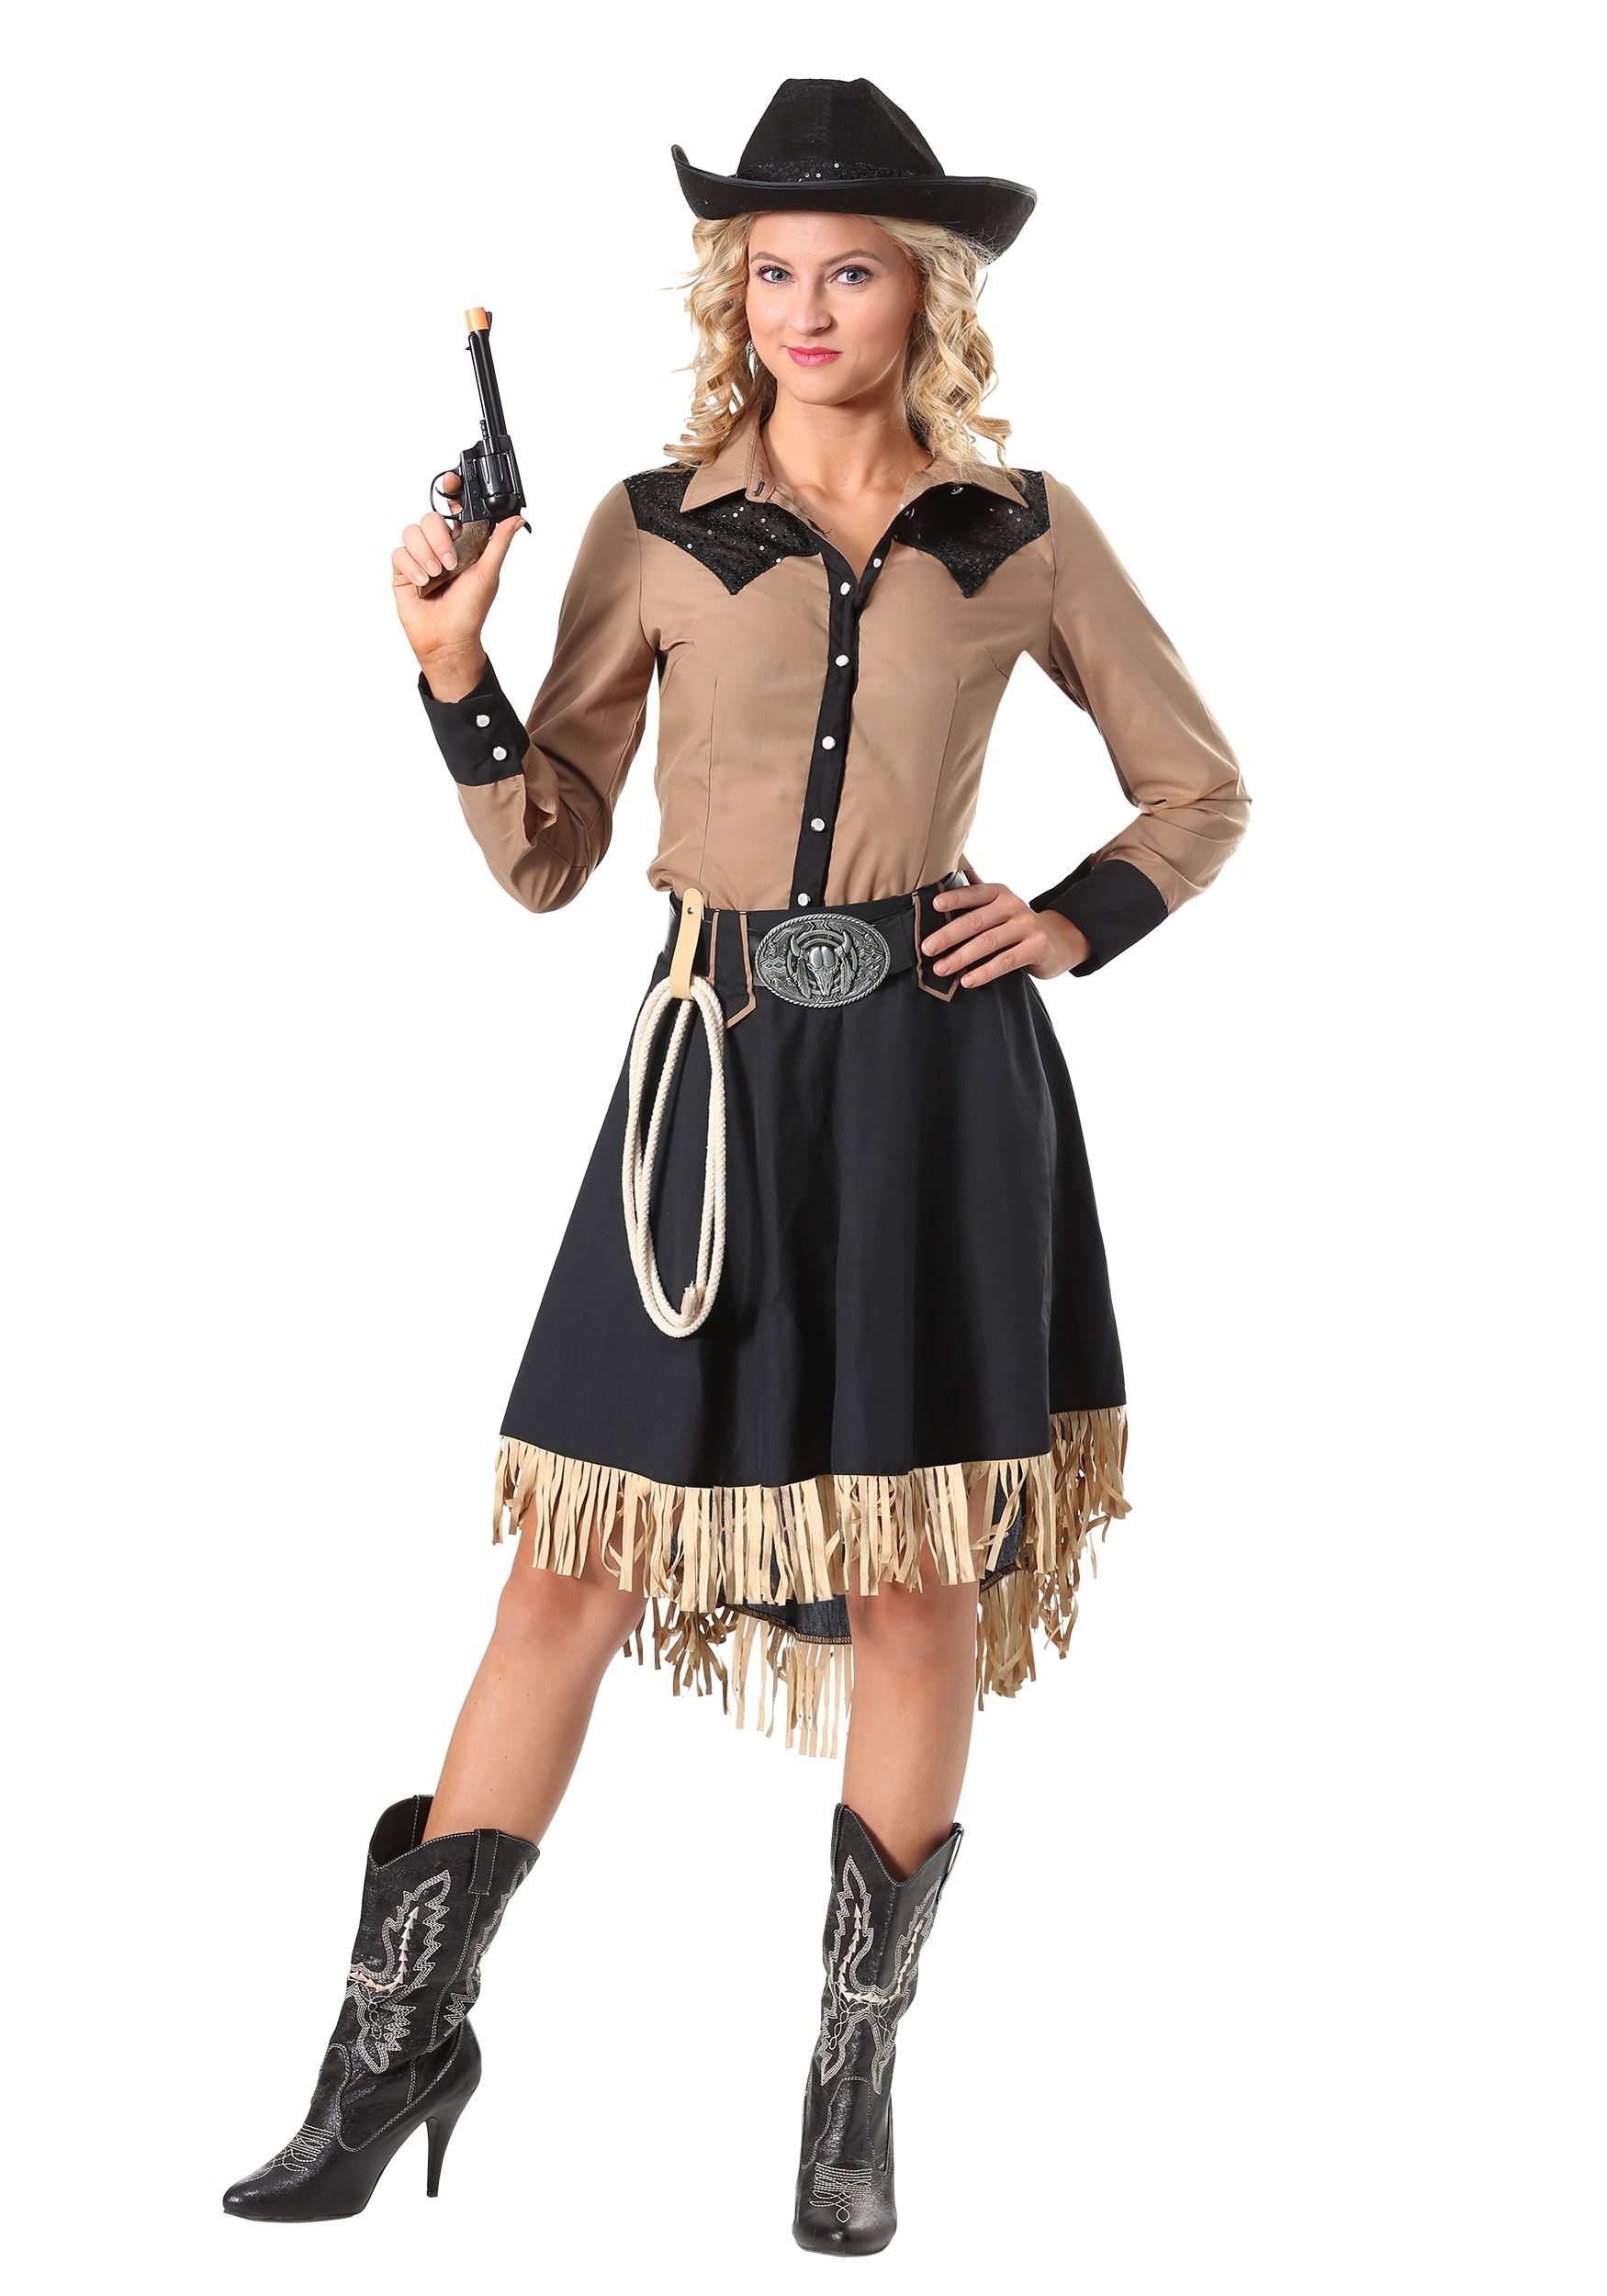 https://images.fun.com/products/41628/1-1/womens-lasson-cowgirl-costume.jpg